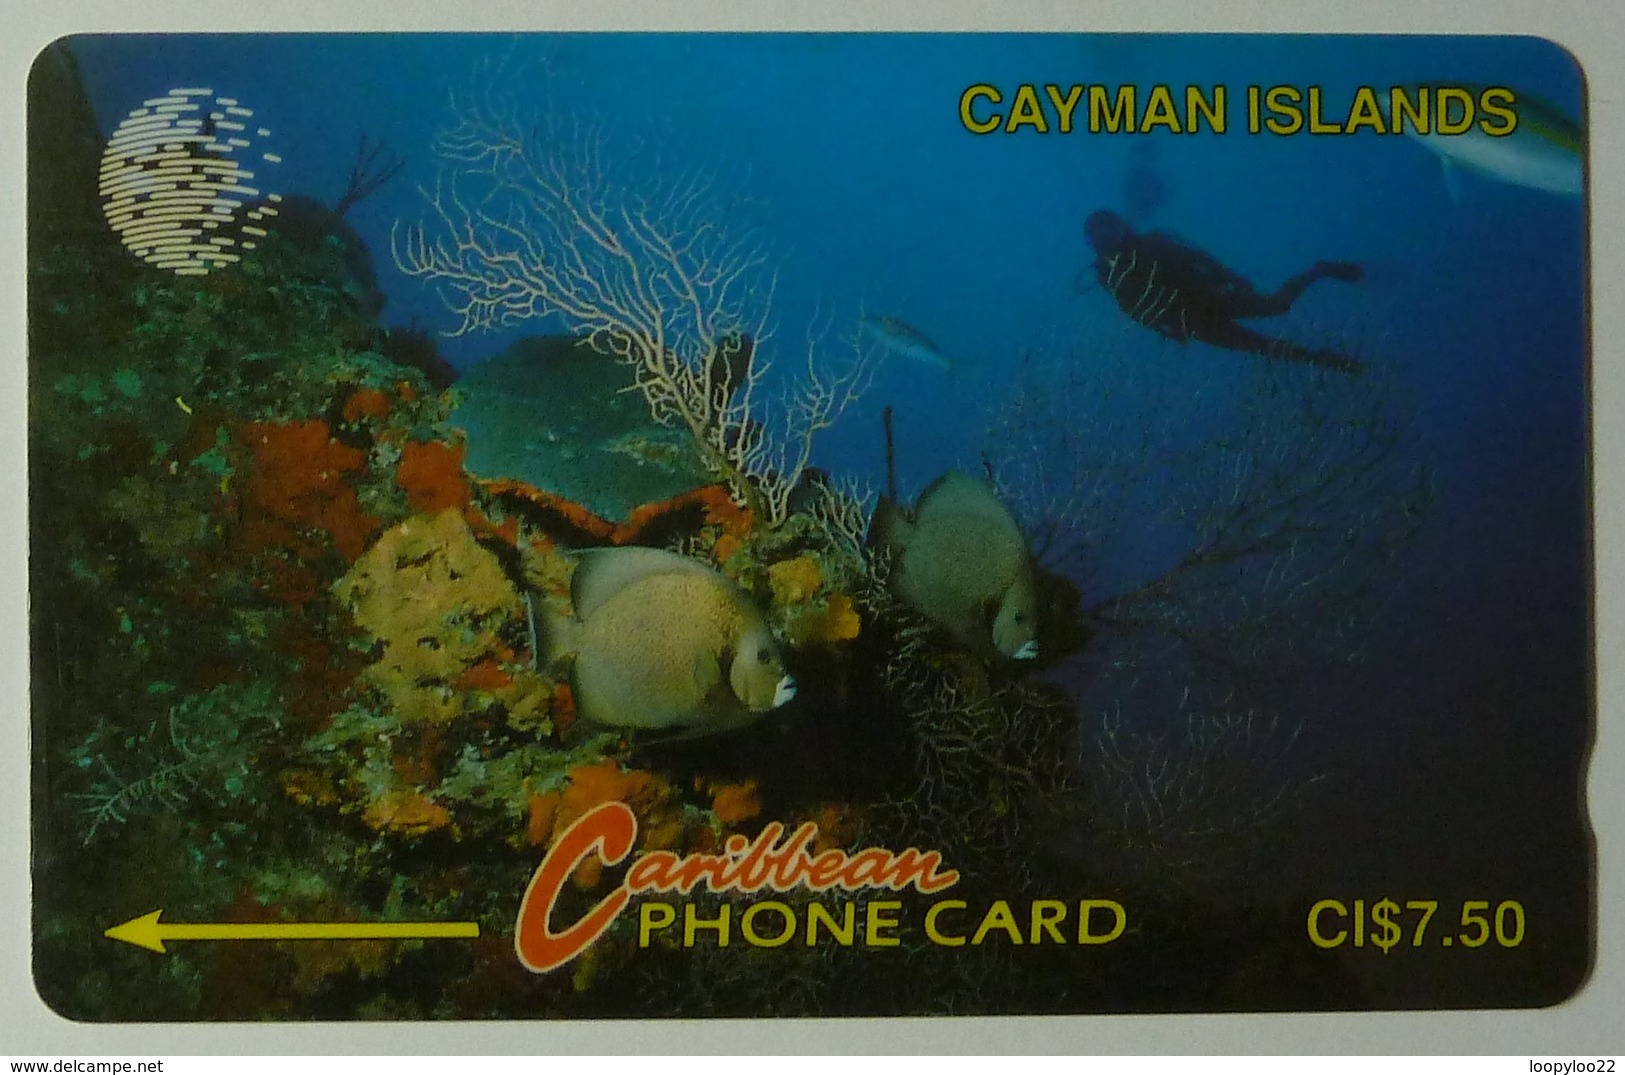 CAYMAN ISLANDS - GPT - CAY-5A - Underwater - Diver - 5CCIA - $7.50 - Used - Kaimaninseln (Cayman I.)